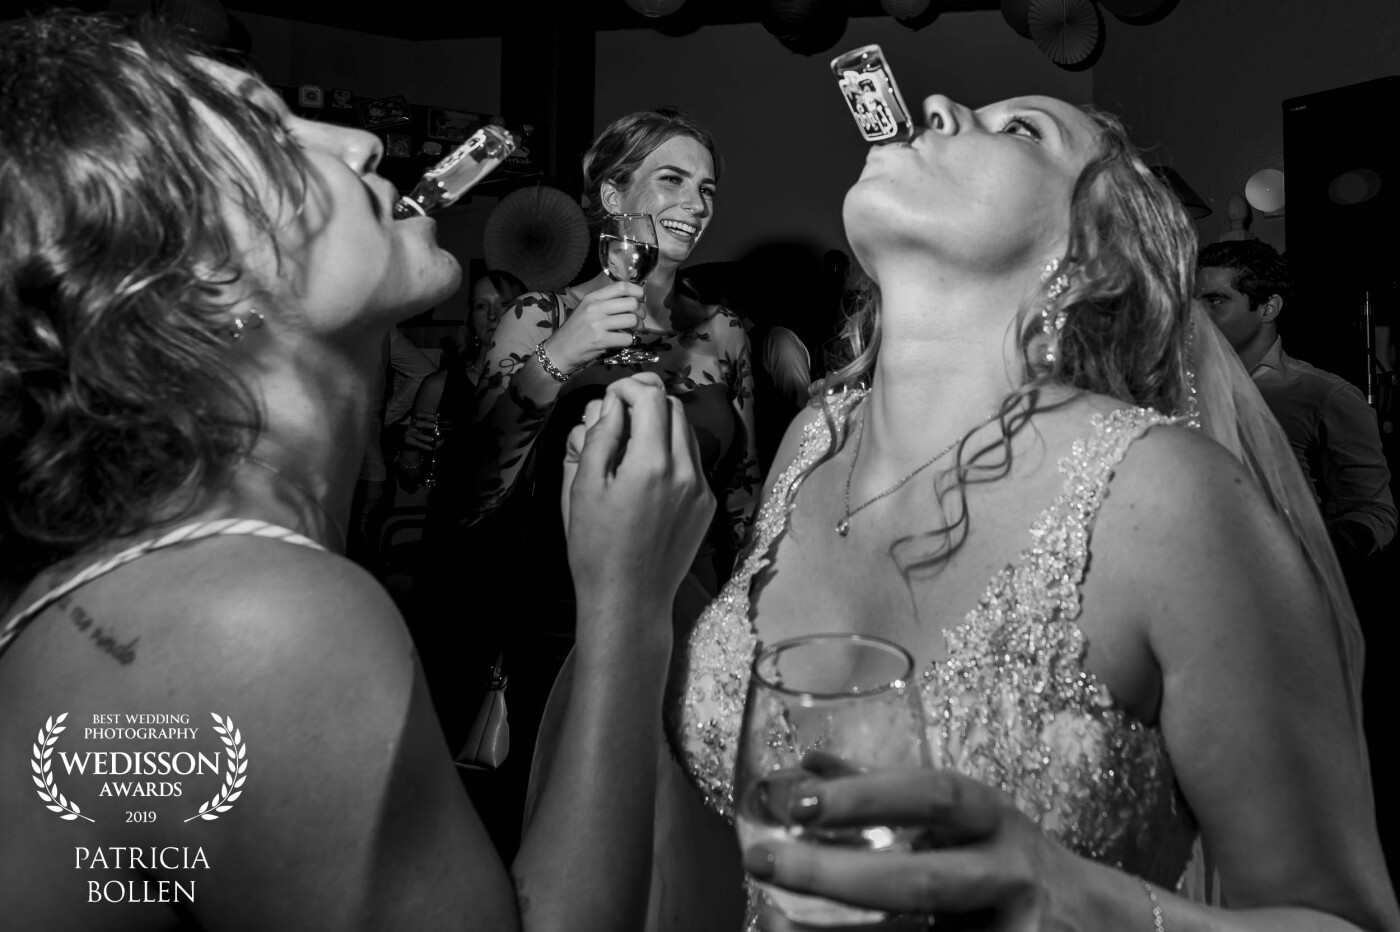 I love it to be on the dancefloor between all the dancing guests. To capture all the fun at the end of the day. The wedding couple between all their friends and family having fun together.